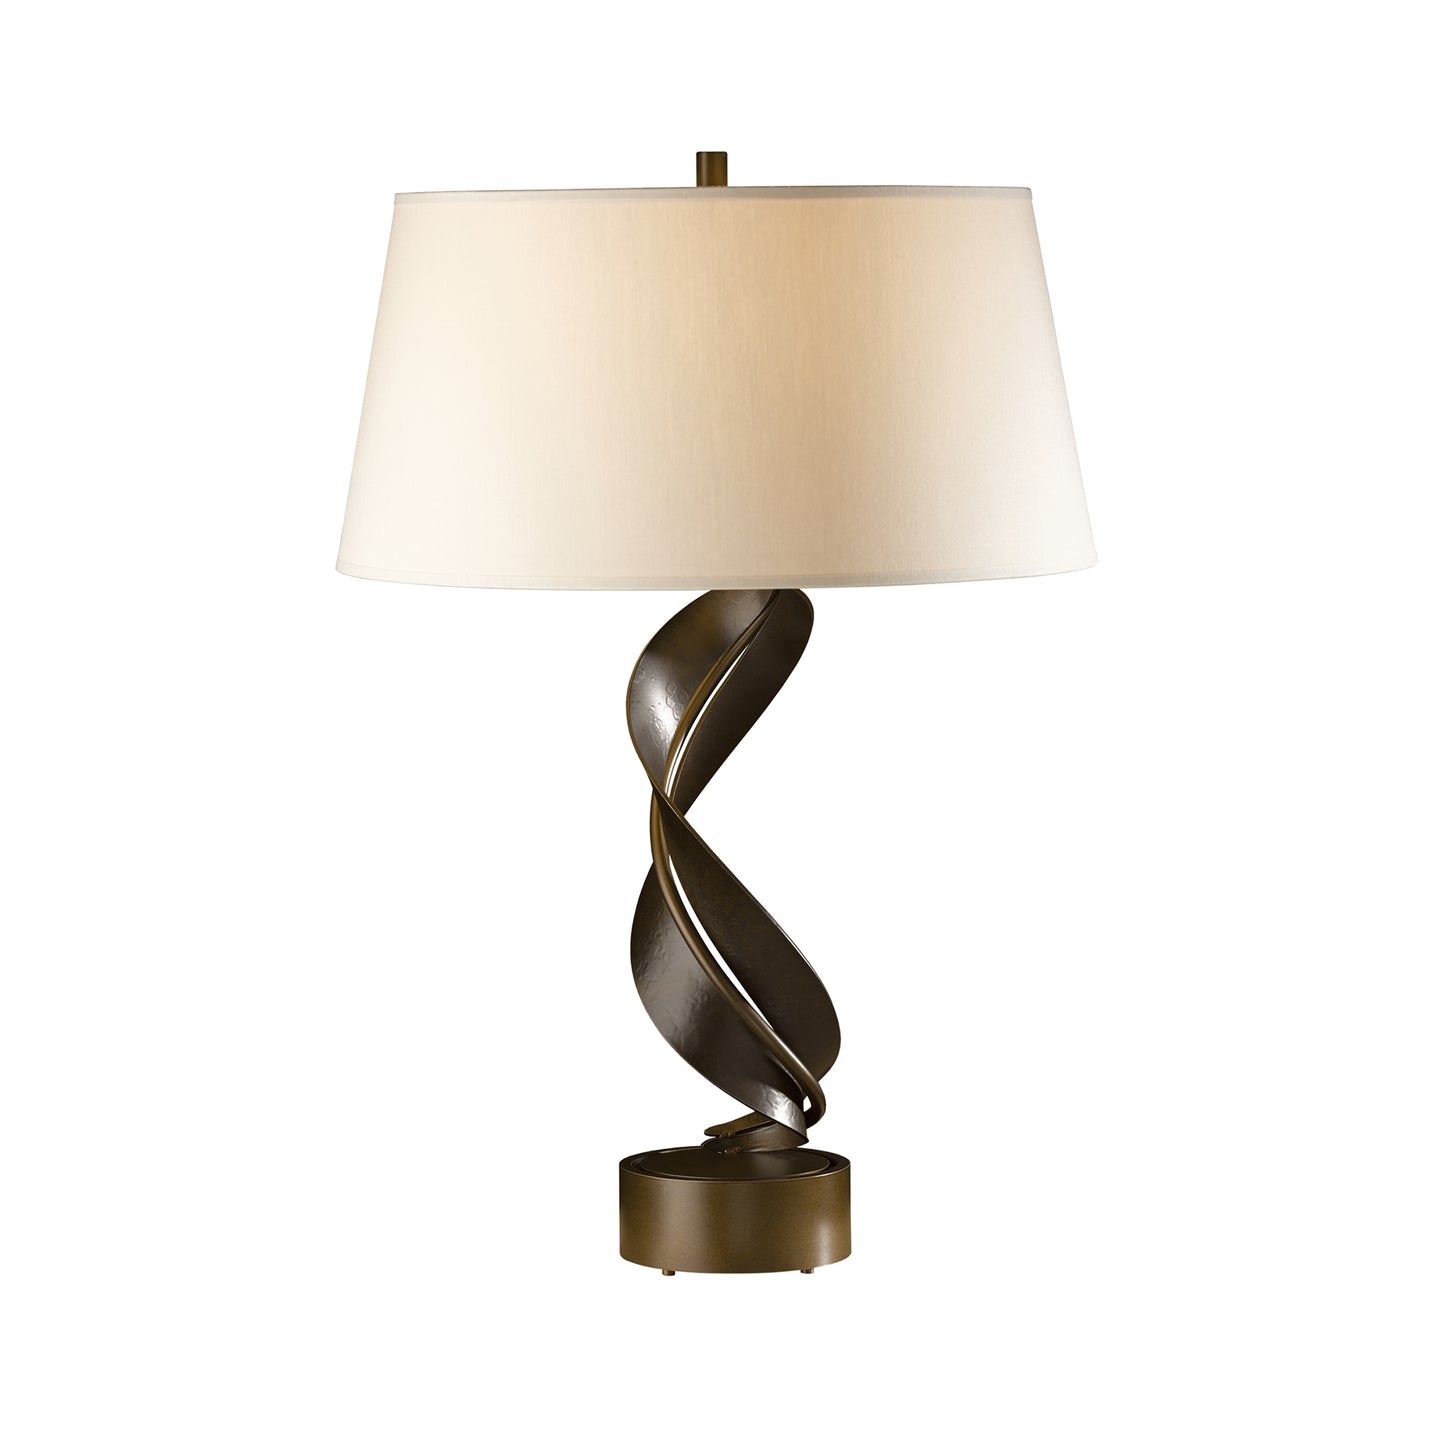 An elegant Hubbardton Forge Folio table lamp featuring a spiraling hand-forged wrought iron base and a wide, off-white lampshade, emitting a warm, inviting glow.